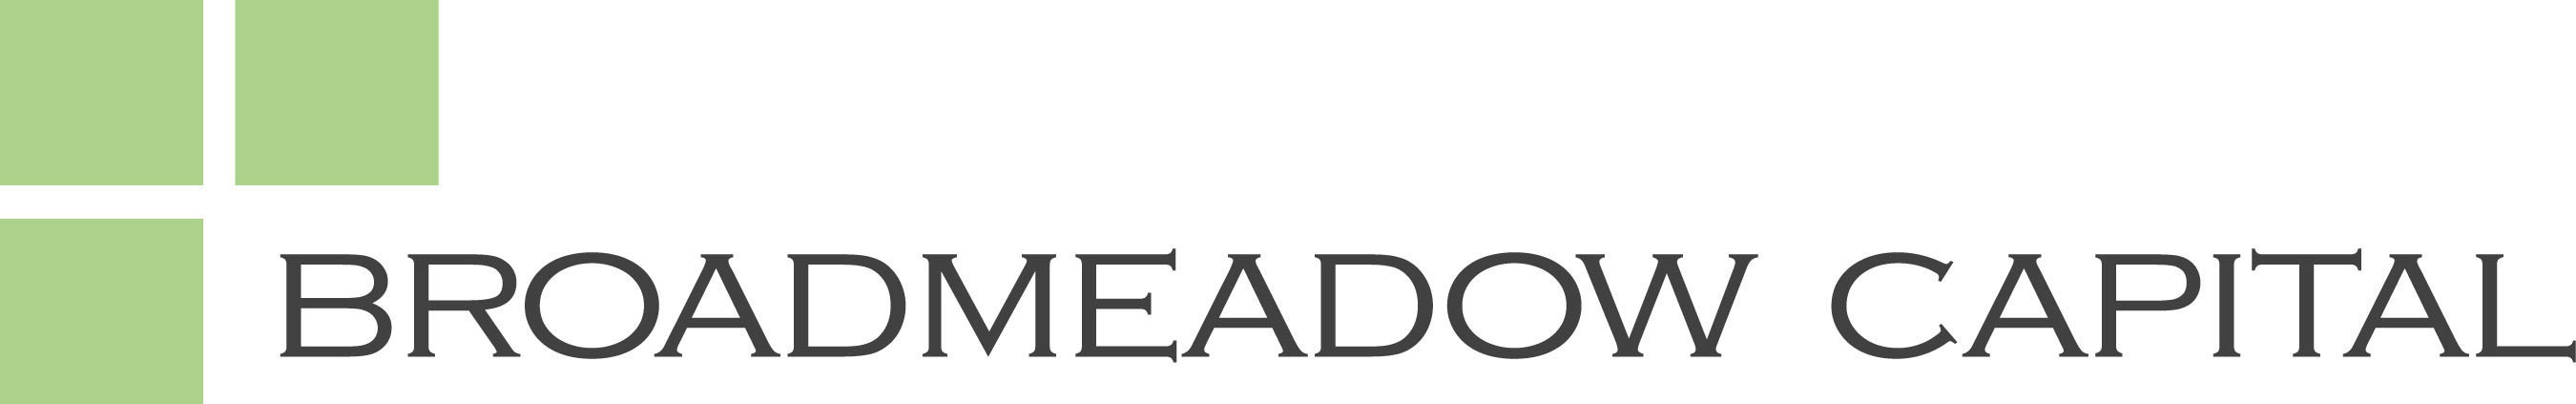 An affiliate of Cedar Capital, Broadmeadow Capital offers alternative and tactical investment strategies to individuals, investment offices and institutional investors.